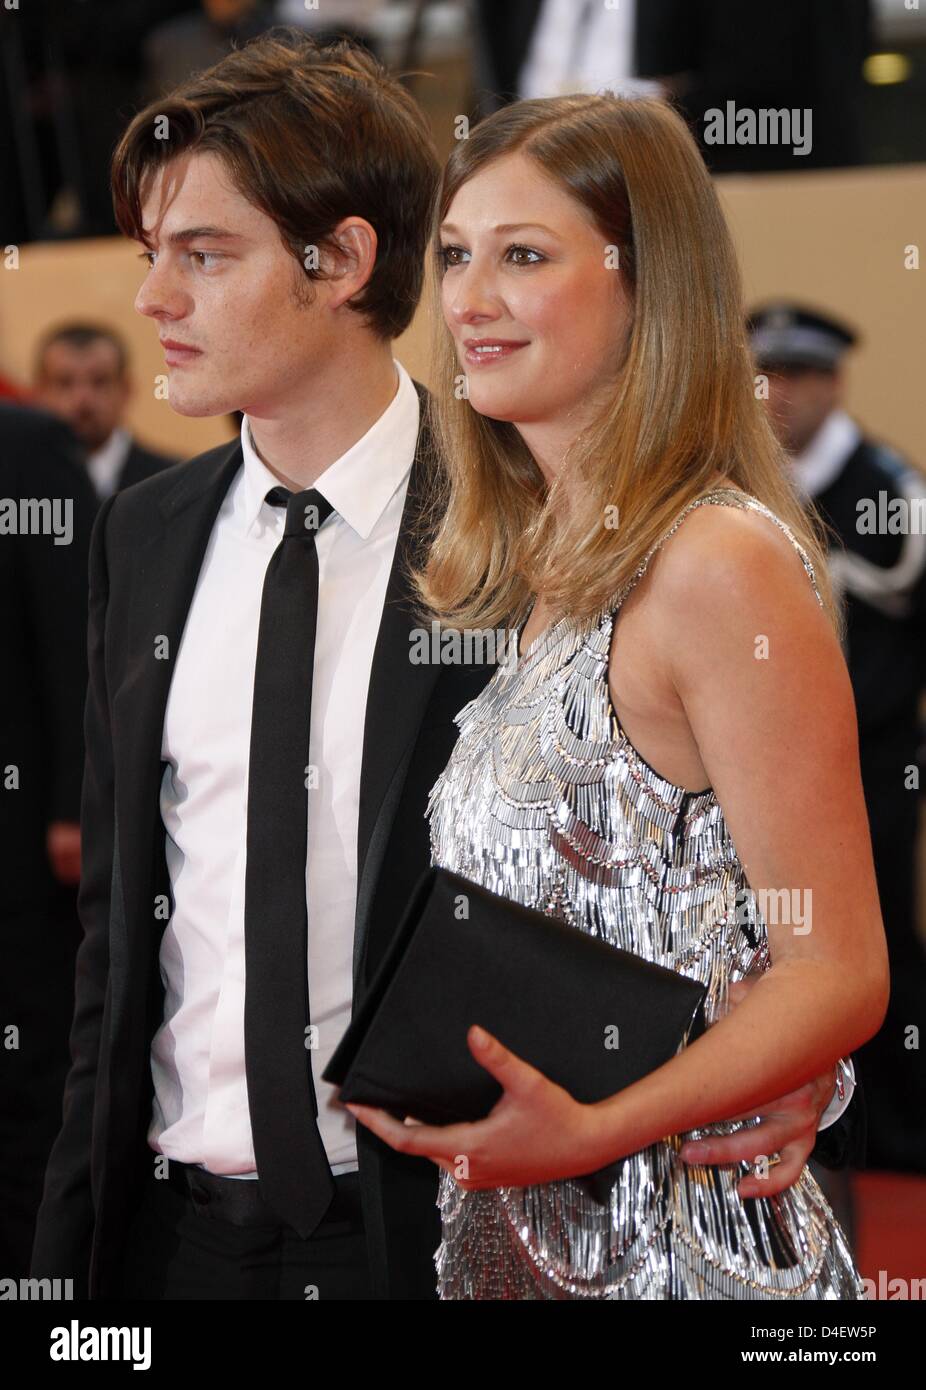 US actor Sam Riley and German actress Alexandra Maria Laraarrive at the premiere of 'The Exchange' at the Palais des Festivals at the 61st Cannes Film Festival in Cannes, France, 20 May 2008. Photo: Hubert Boesl Stock Photo